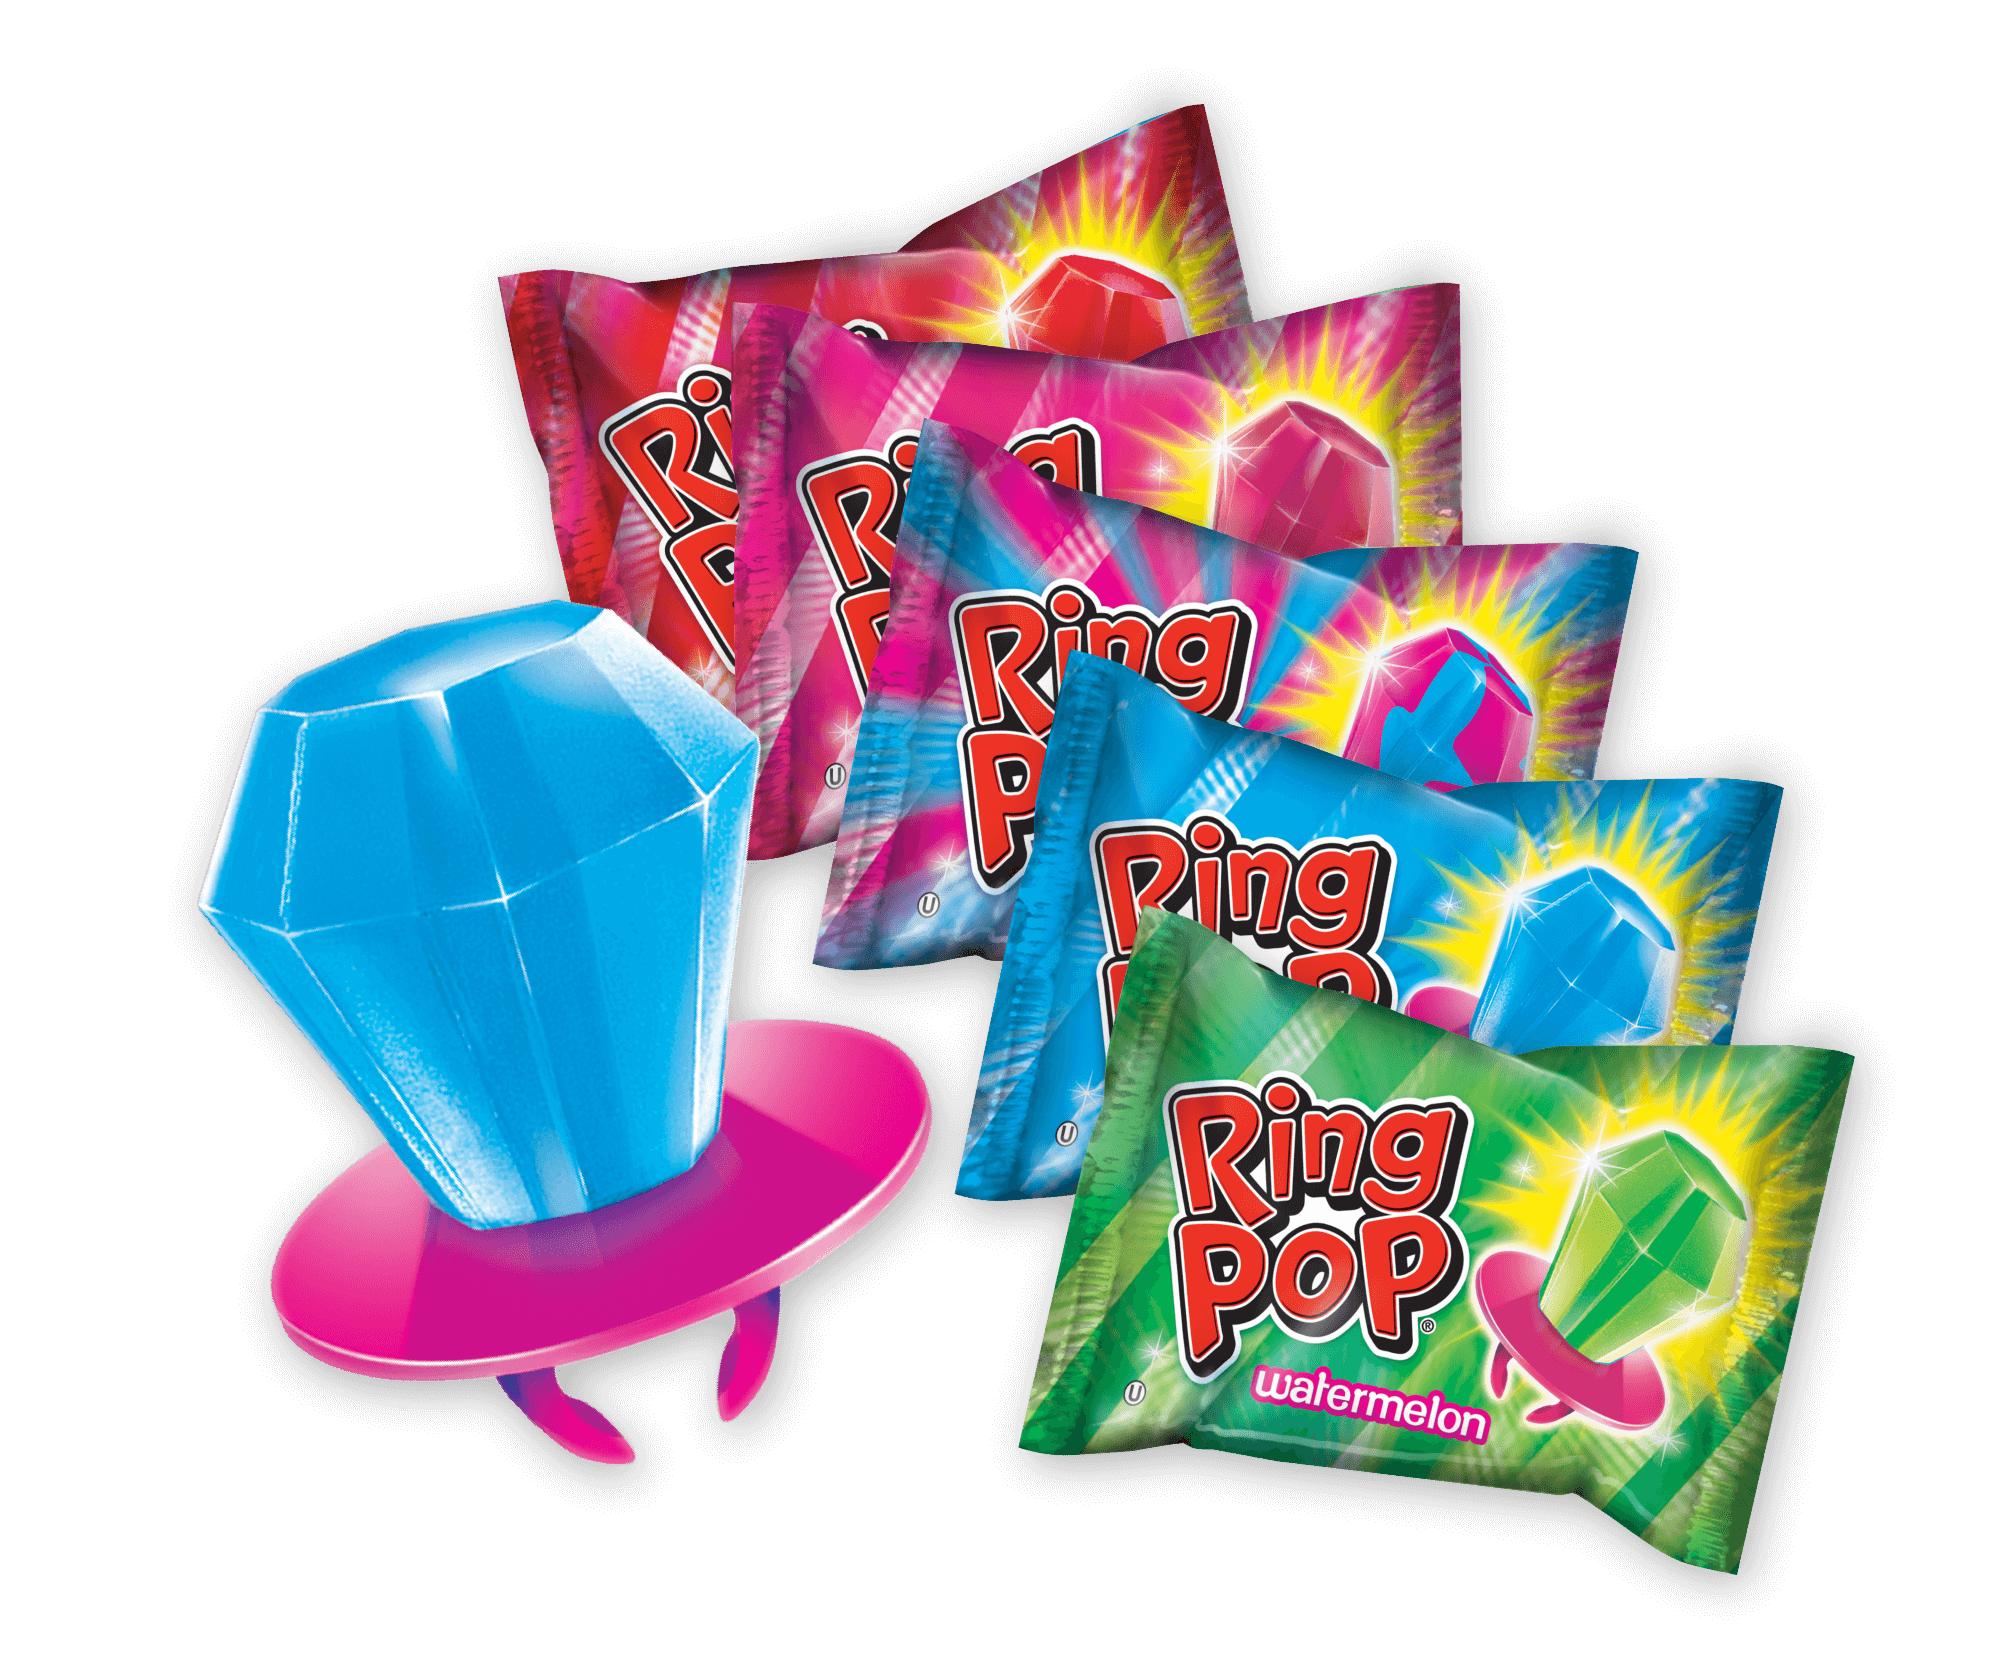 Ring Pops, Limited Edition Mix, Variety Box, (Sours, Original & Twisted) 40  ct. - Walmart.com